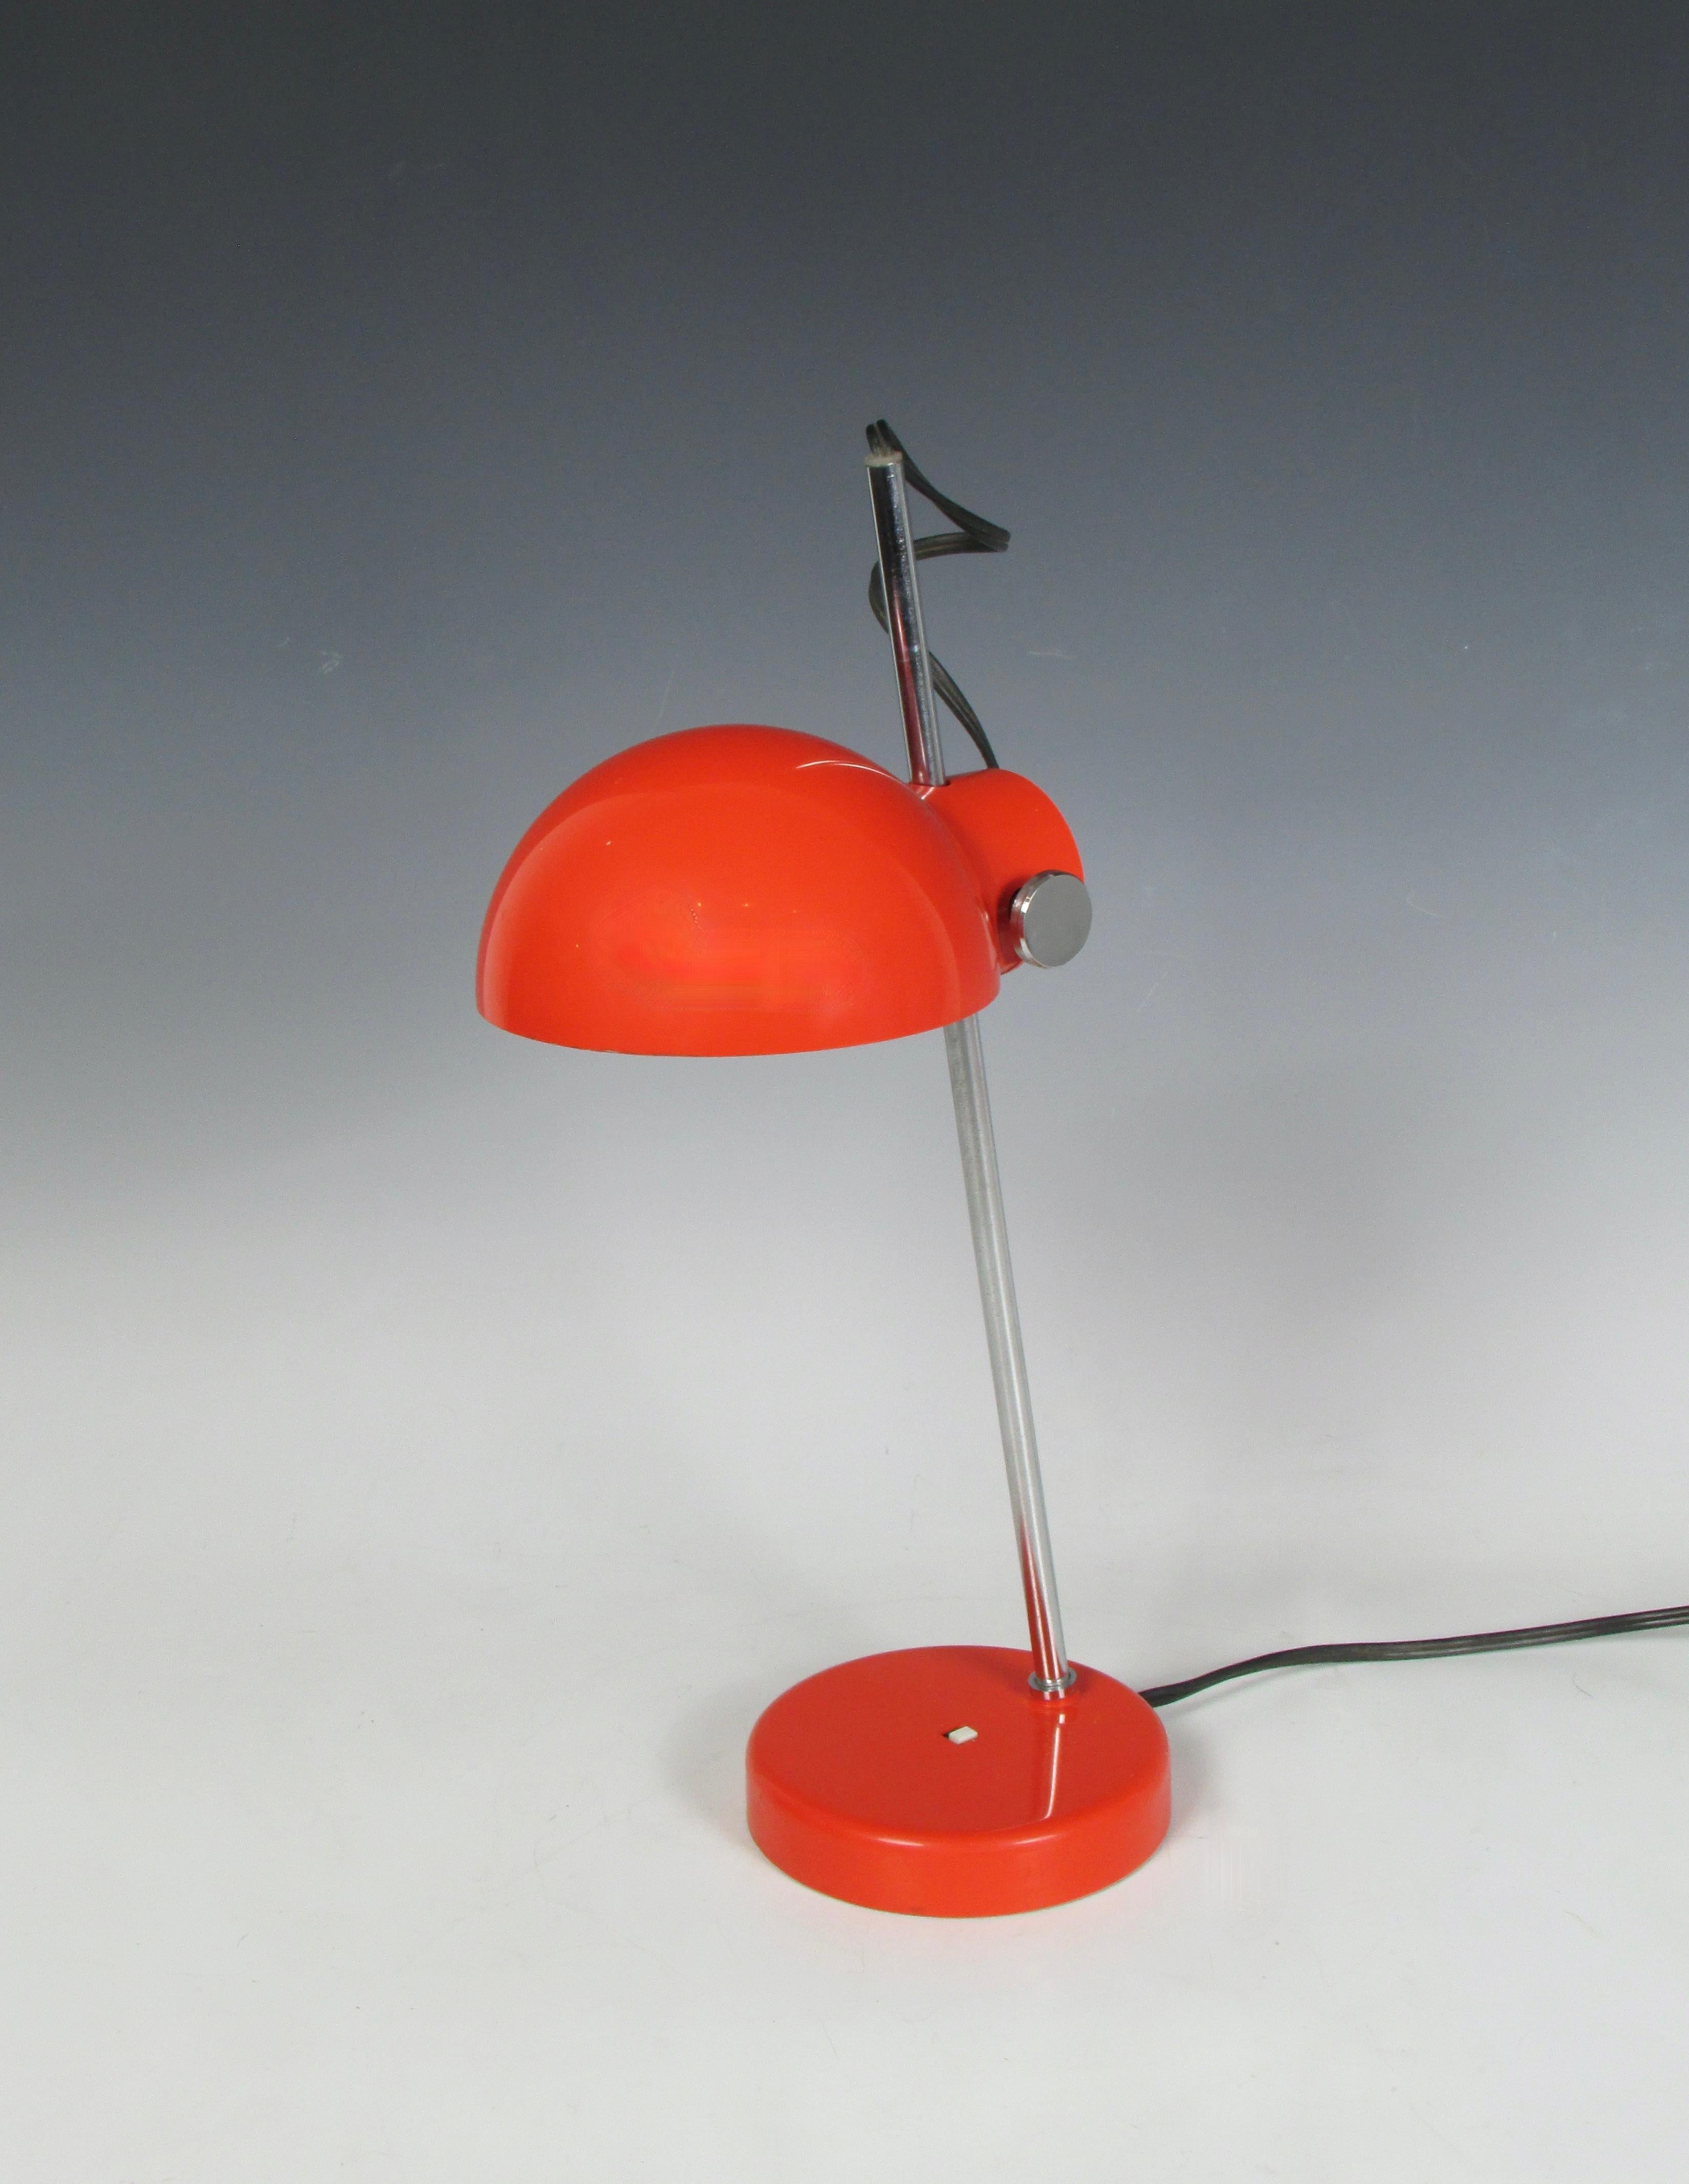 Space age lamp made in Japan for Lightolier. Weighted steel base supports chrome shaft holding adjustable plastic shade.